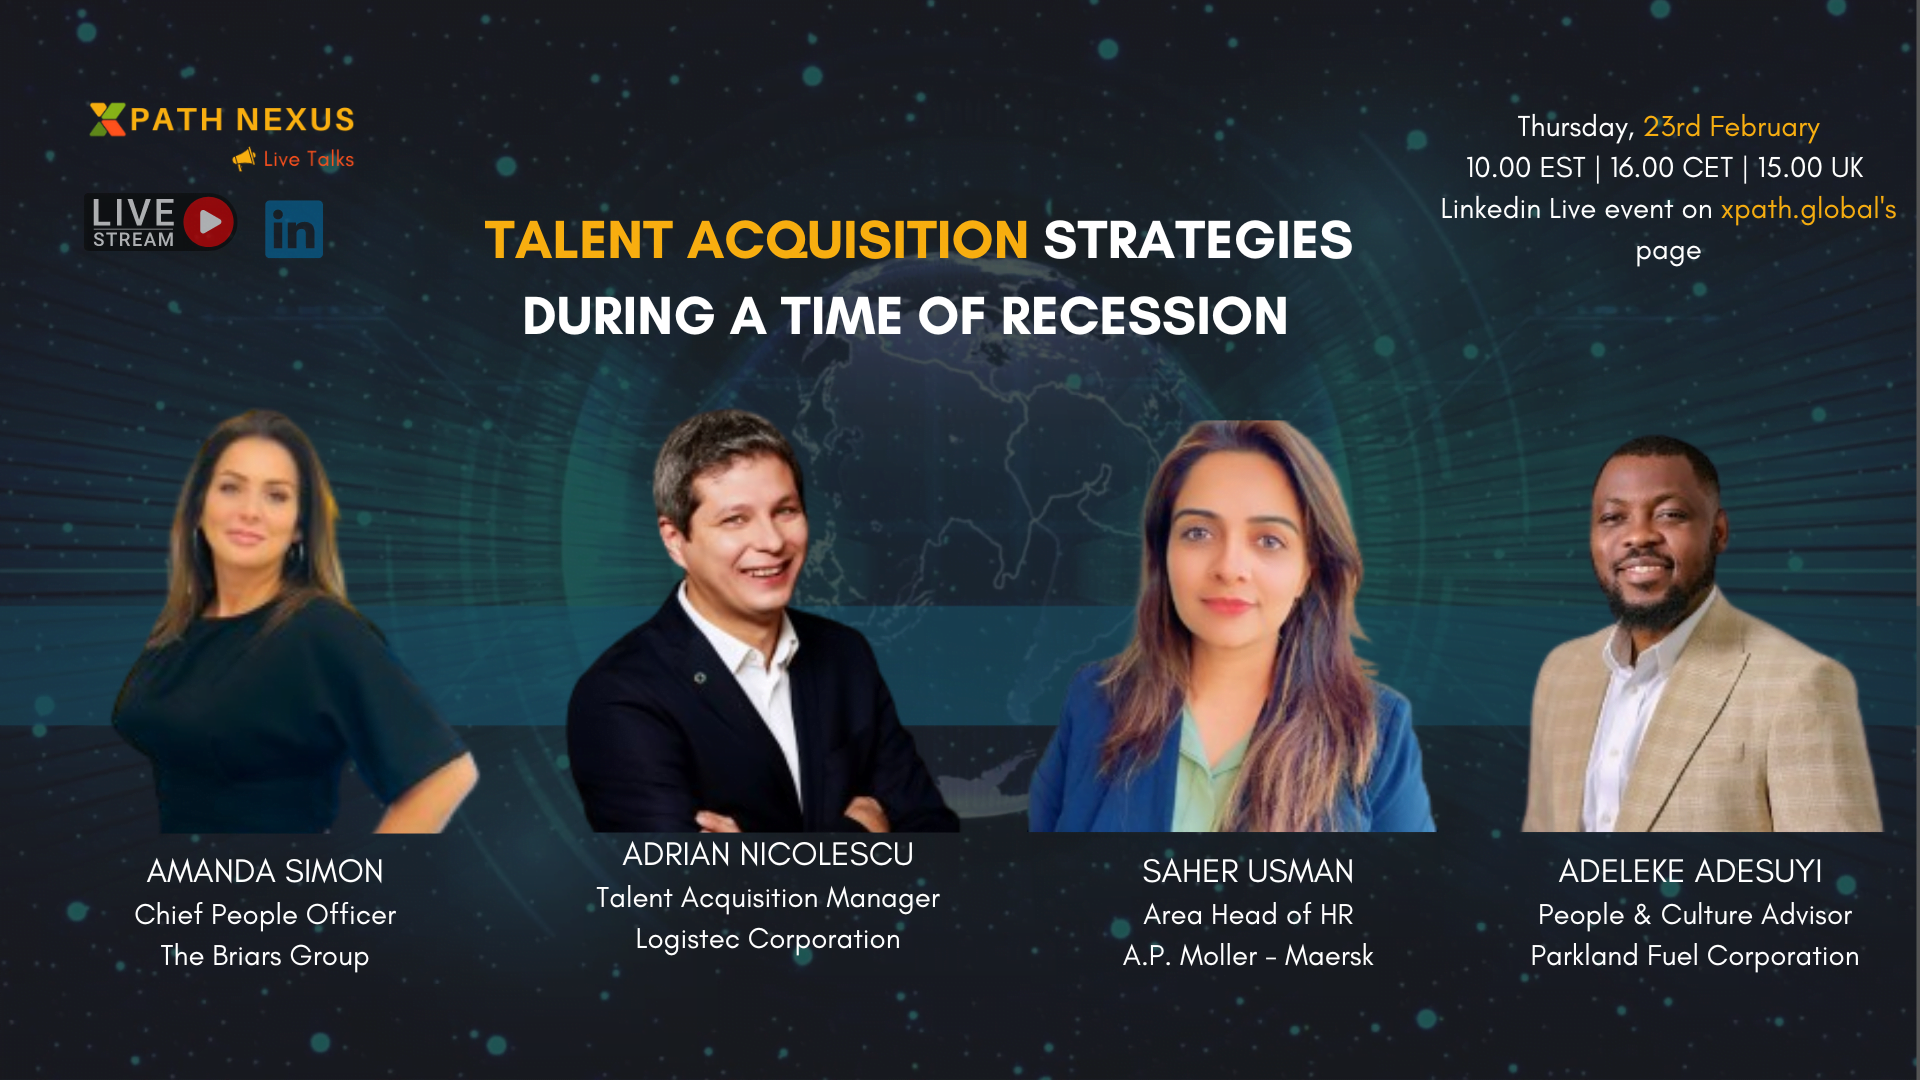 Talent acquisition and retention strategies in a time of recession